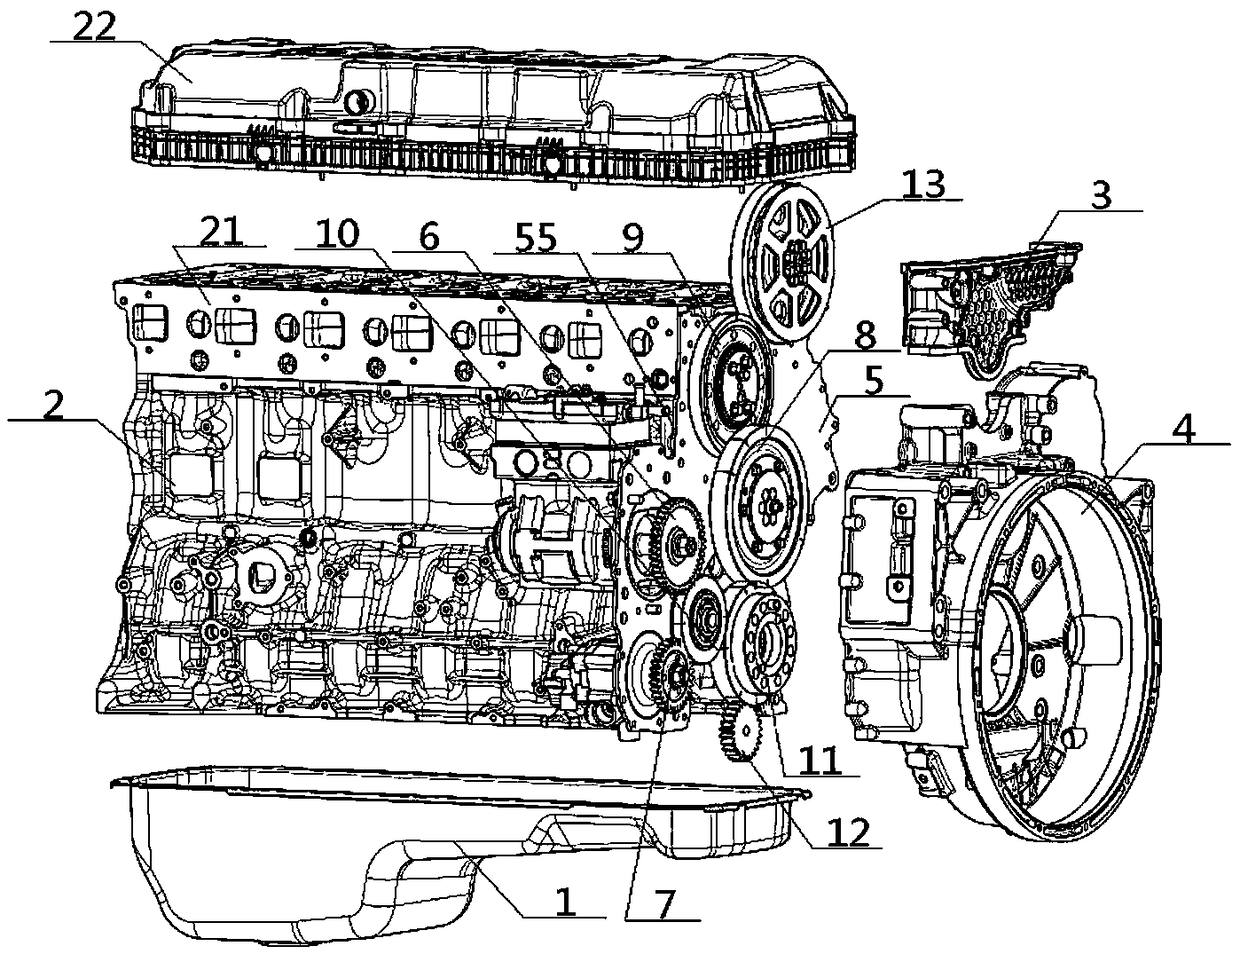 Rear-end gear chamber structure of diesel engine